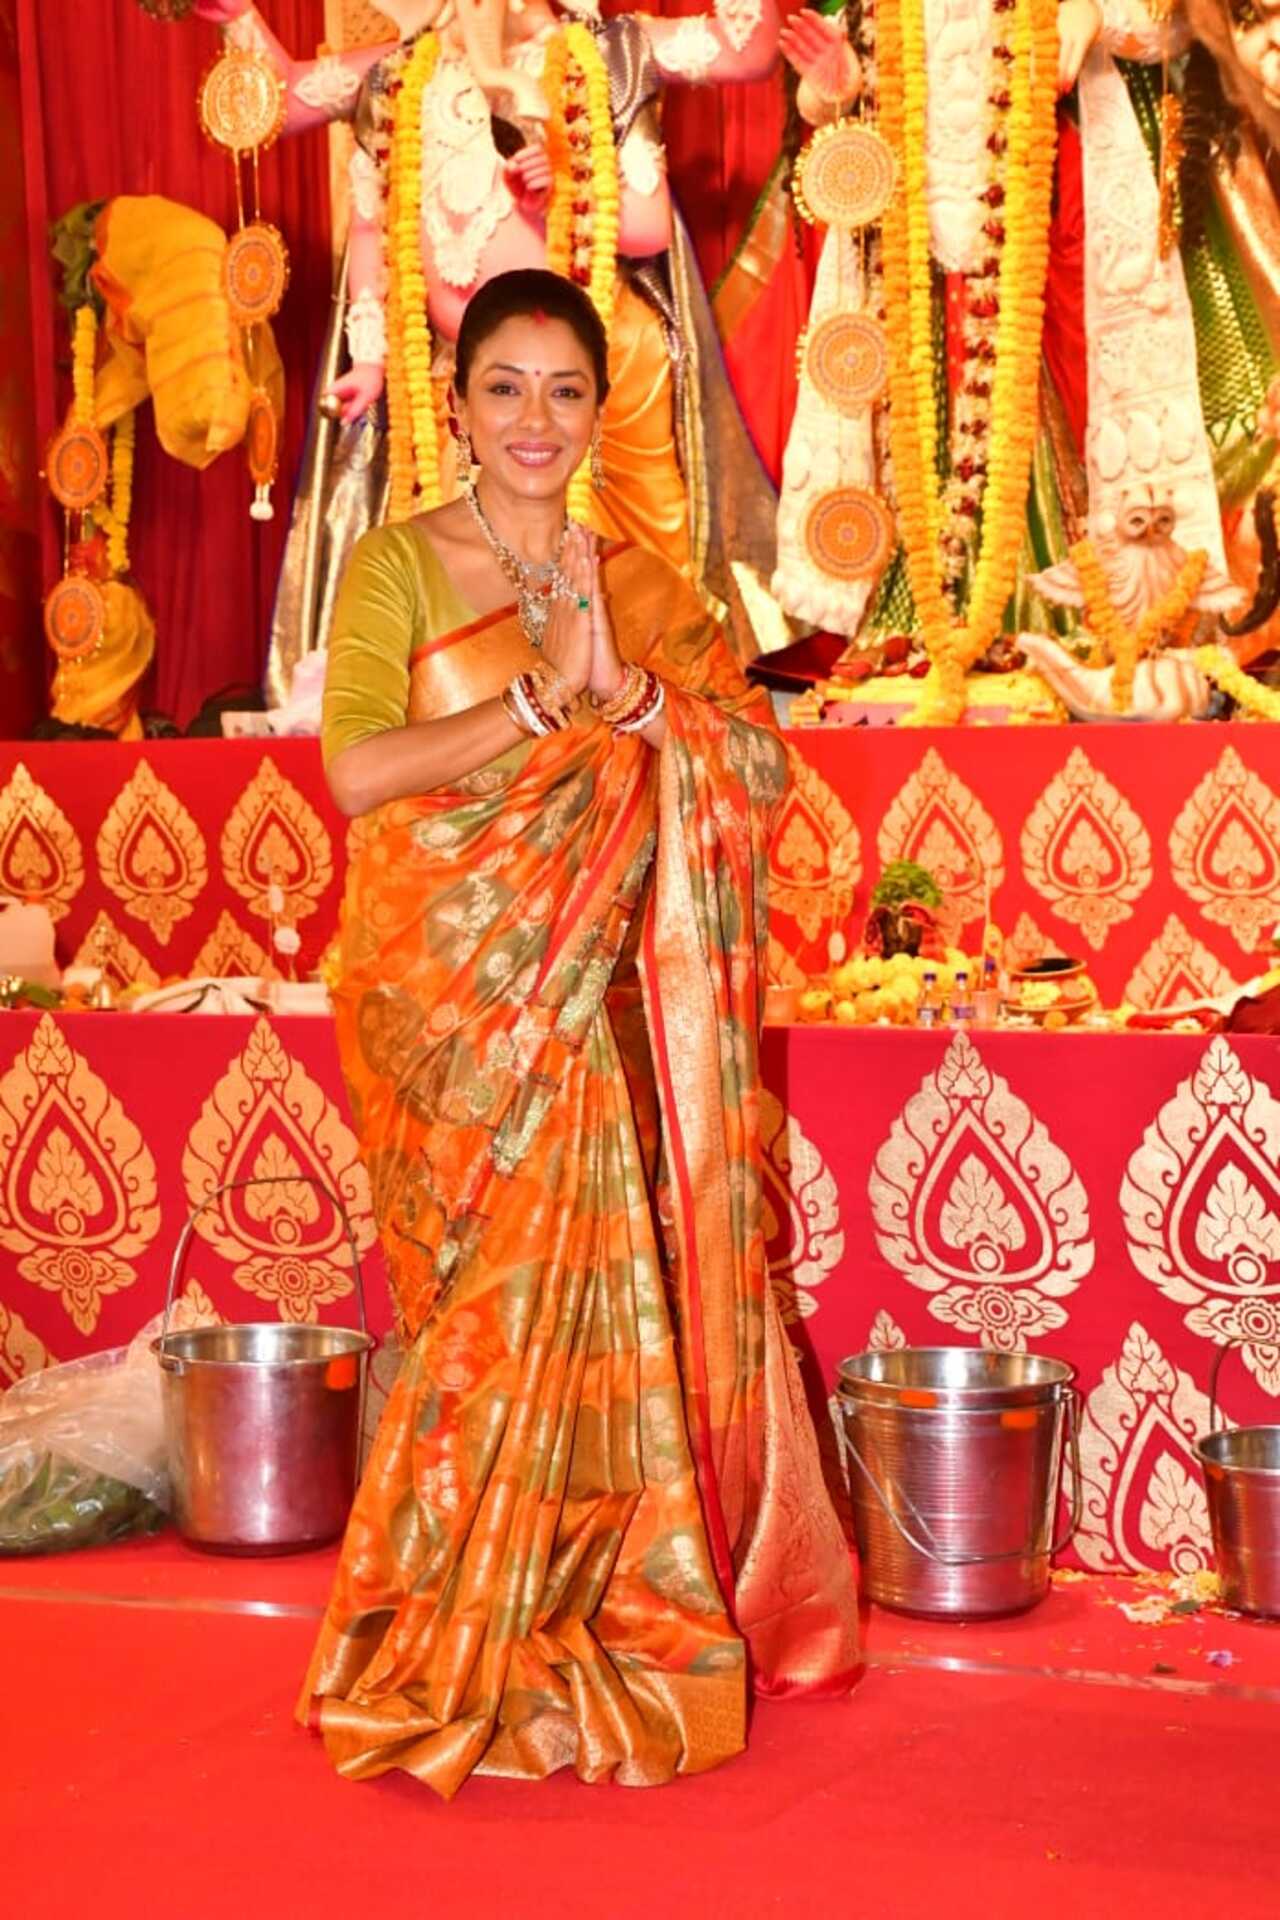 Rupali Ganguly sought blessings of Durga at the pandal